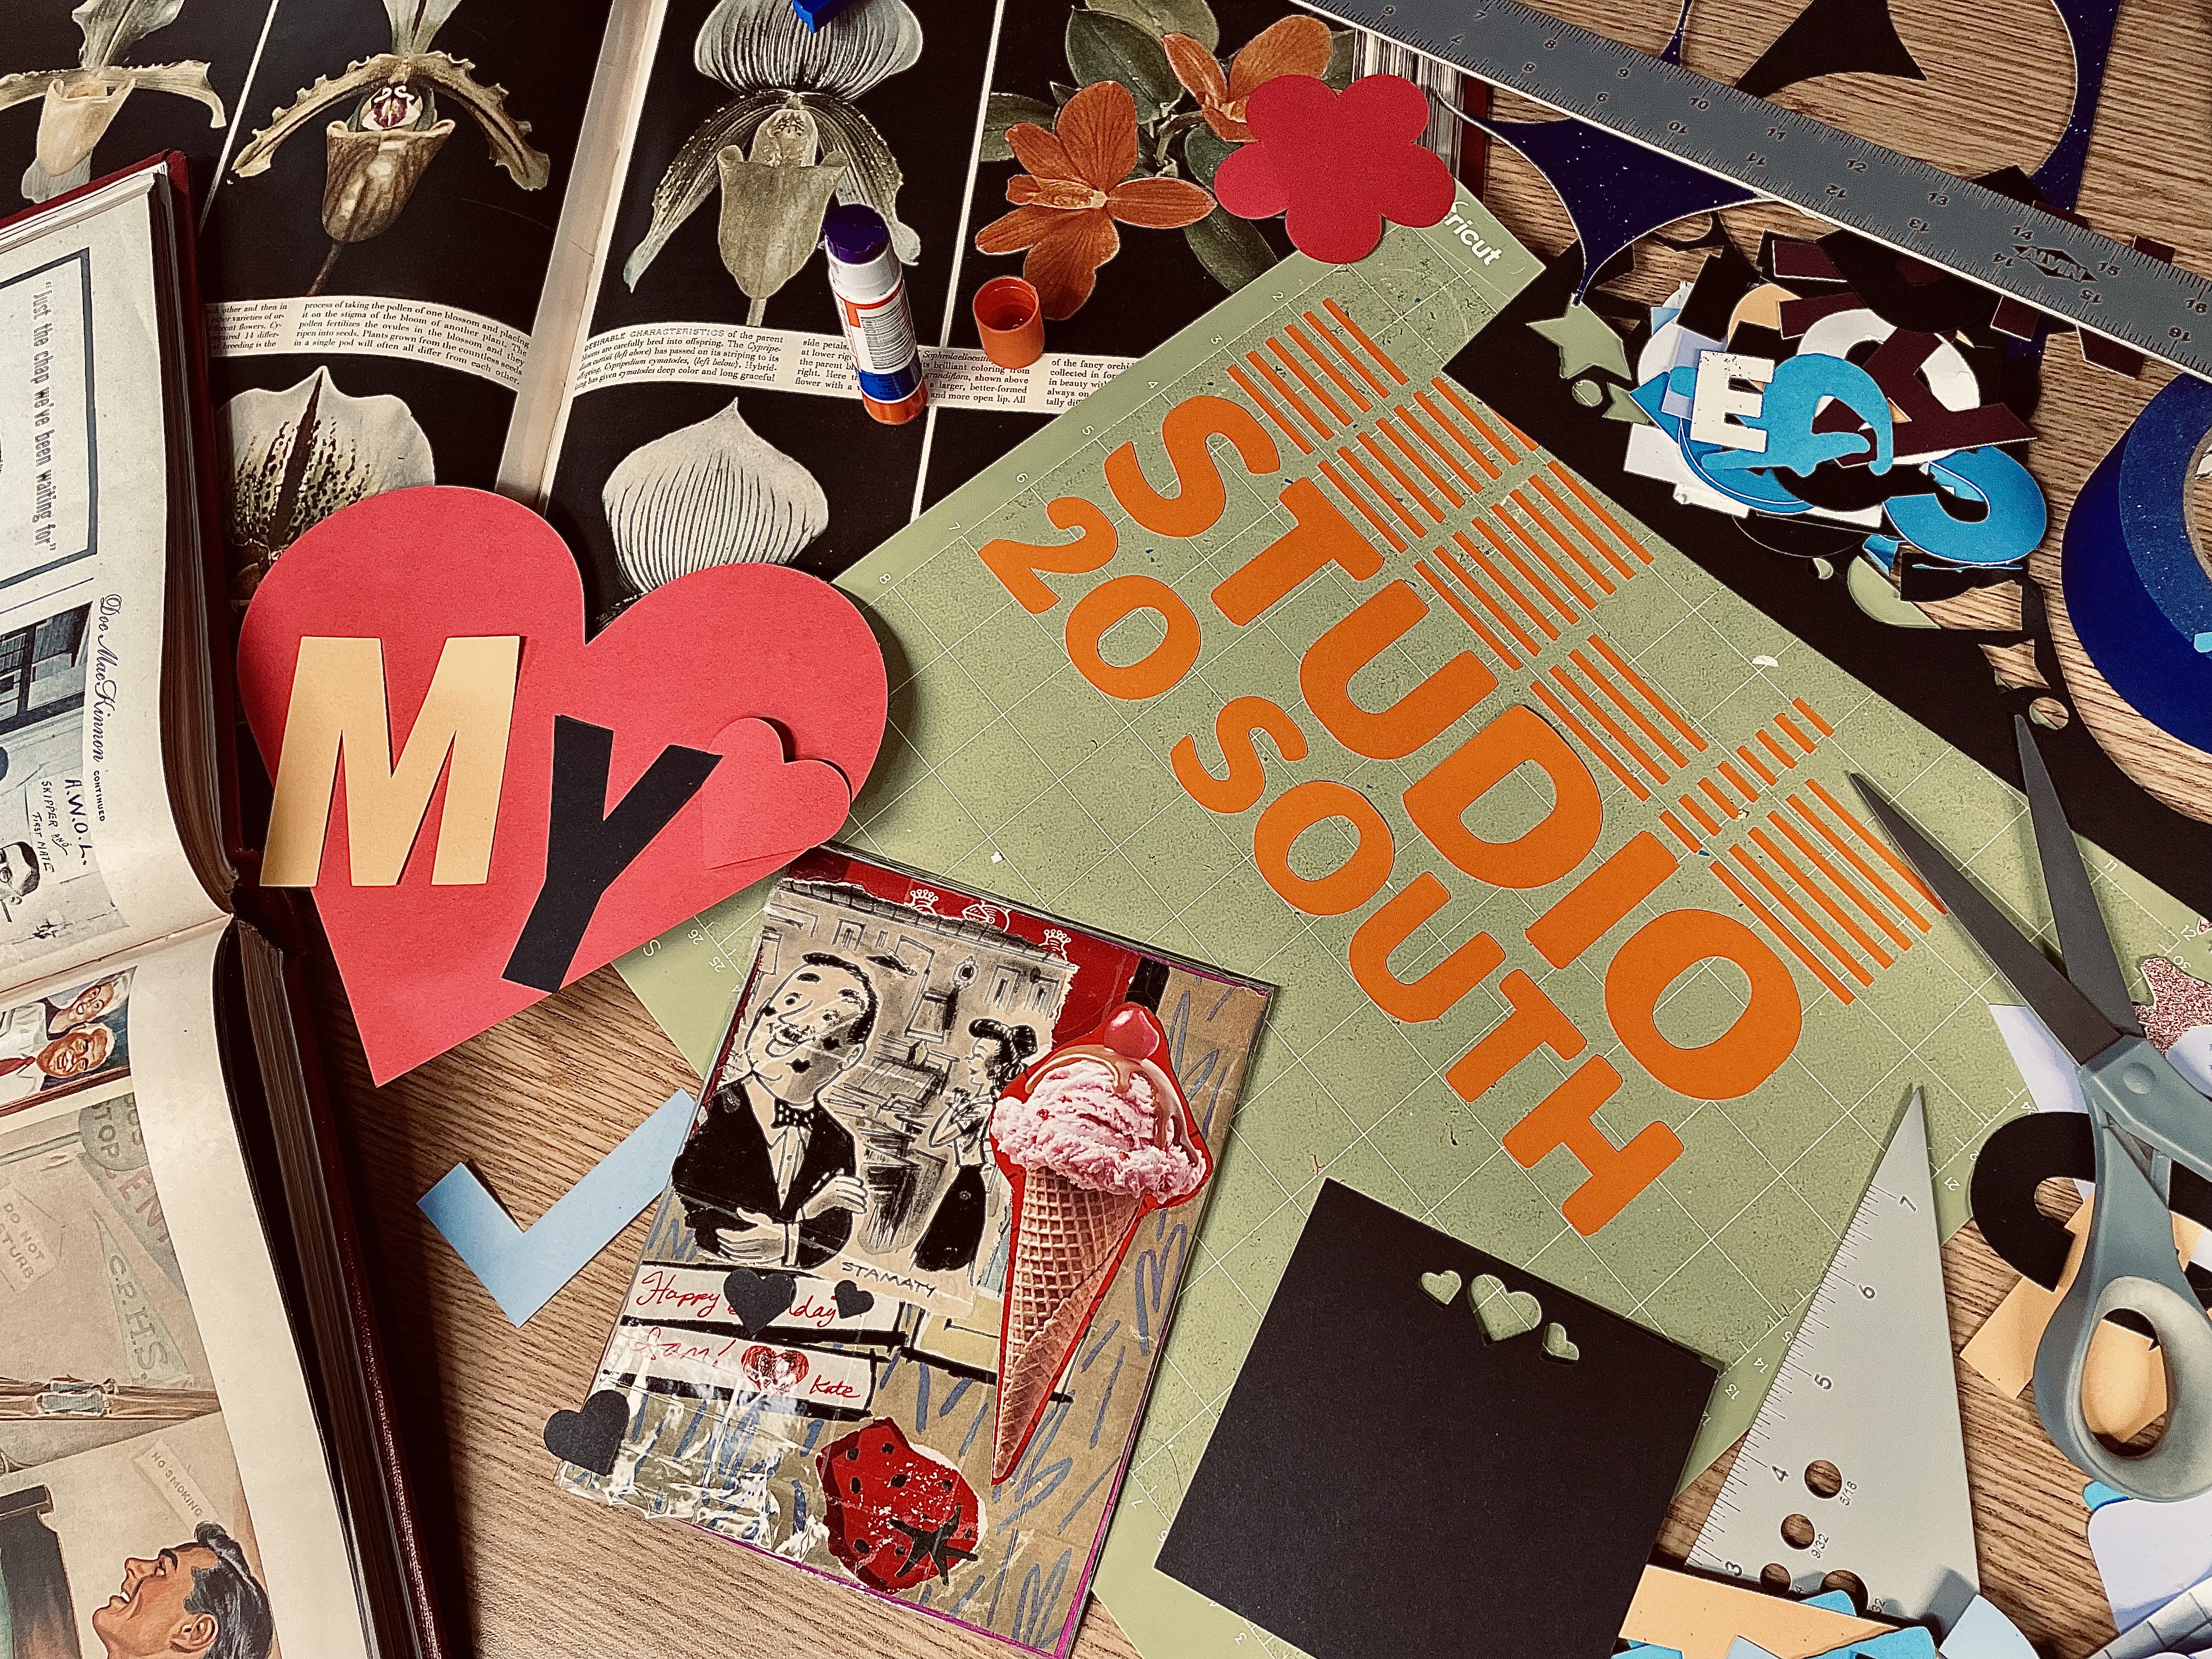 Image of paper scraps, scissors and other card-making collage items